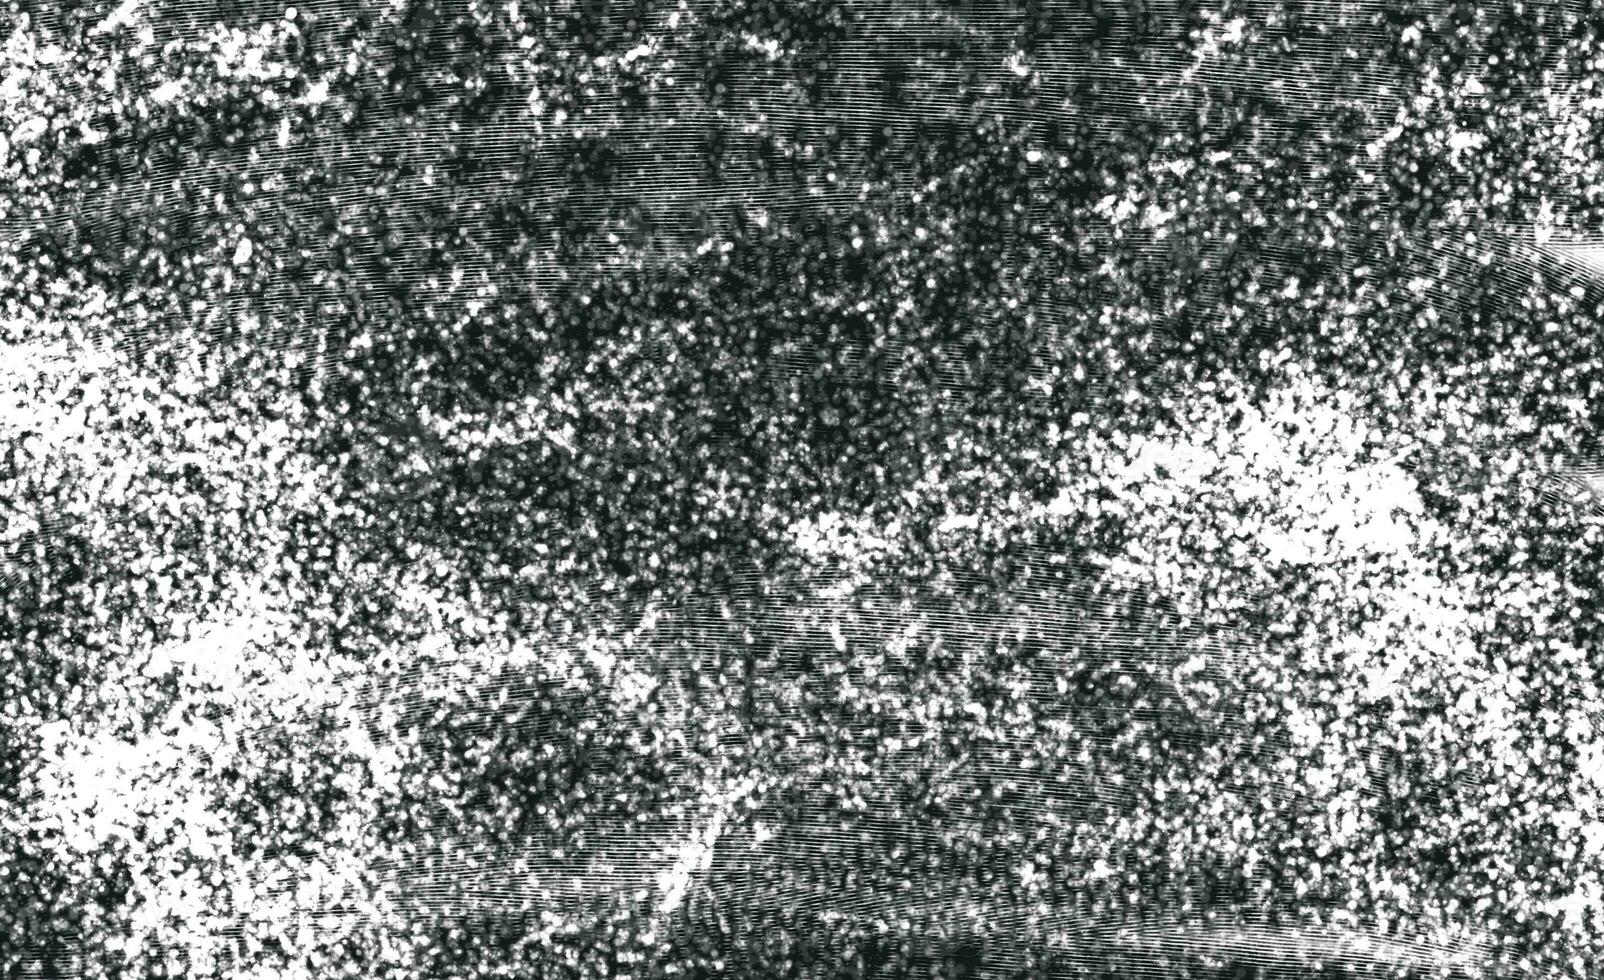 Grunge Black and White Distress Texture.Dust Overlay Distress Grain ,Simply Place illustration over any Object to Create grungy Effect. photo